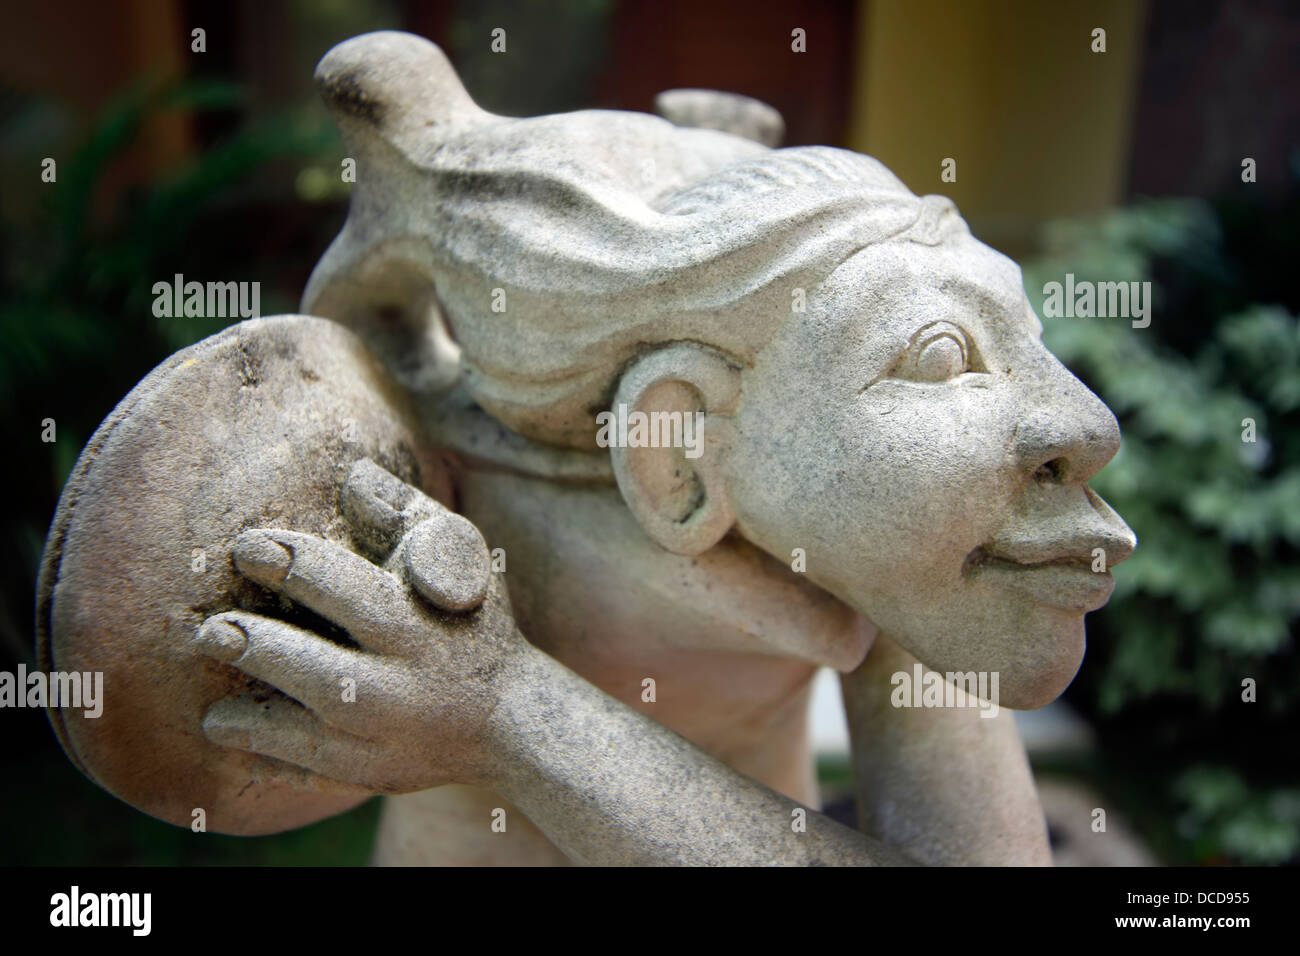 The Indonesian sculpture Stock Photo